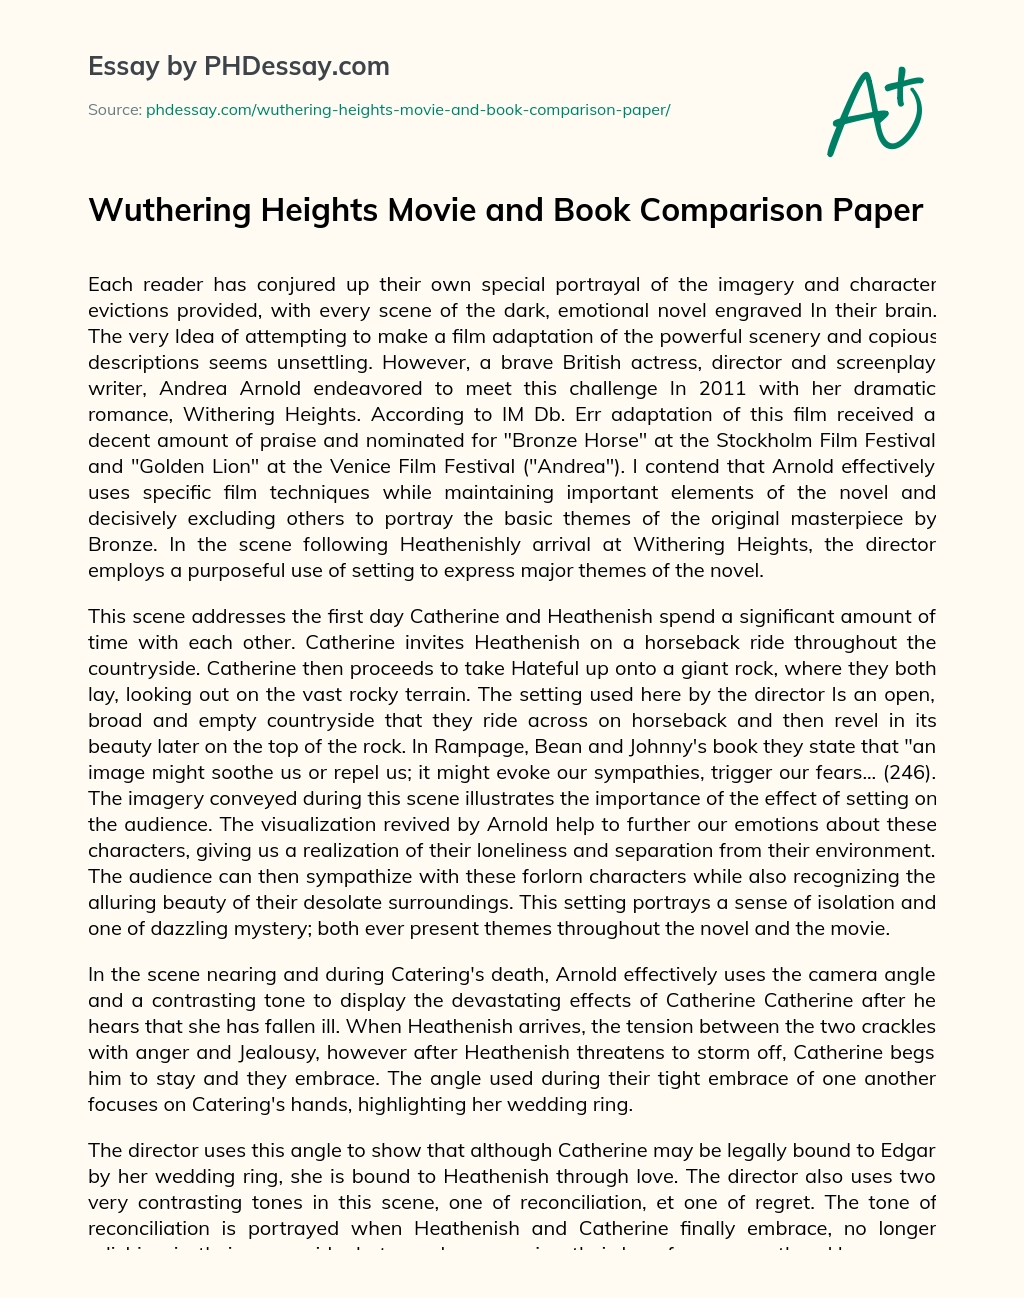 Wuthering Heights Movie and Book Comparison Paper essay